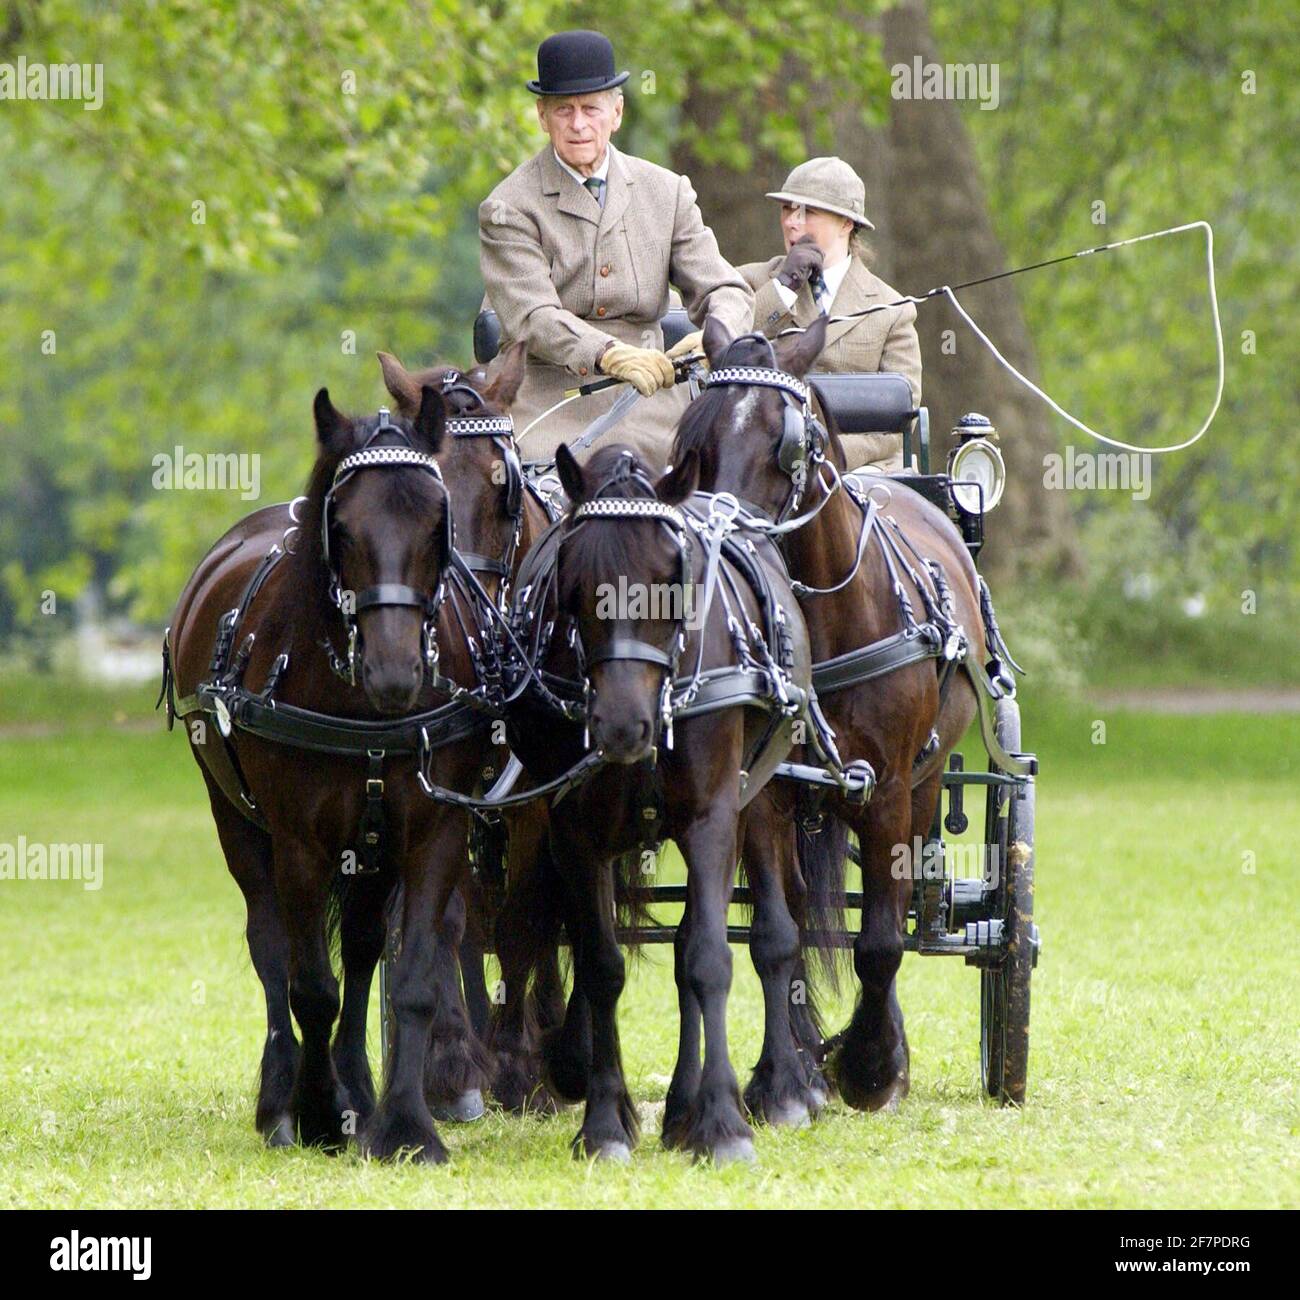 File photo dated 17/05/02 of the Duke of Edinburgh before competing at the Royal Windsor Horse Show, Windsor. The Duke of Edinburgh has died, Buckingham Palace has announced. Issue date: Friday April 9, 2020.. See PA story DEATH Philip. Photo credit should read: Fiona Hanson/PA Wire Stock Photo